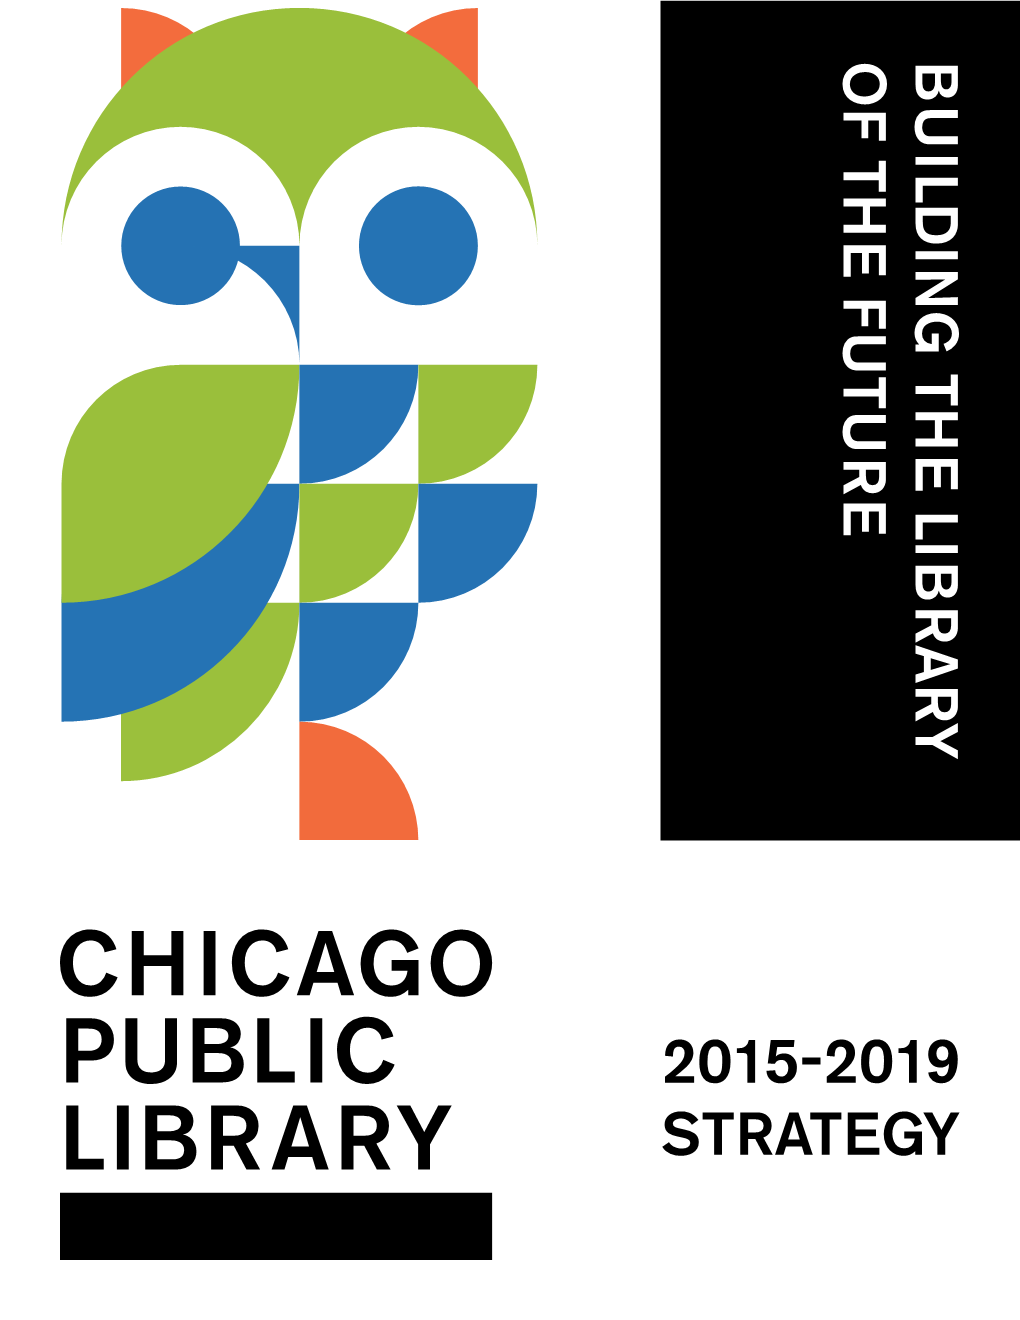 Chicago Public Library 2015-2019 Strategy